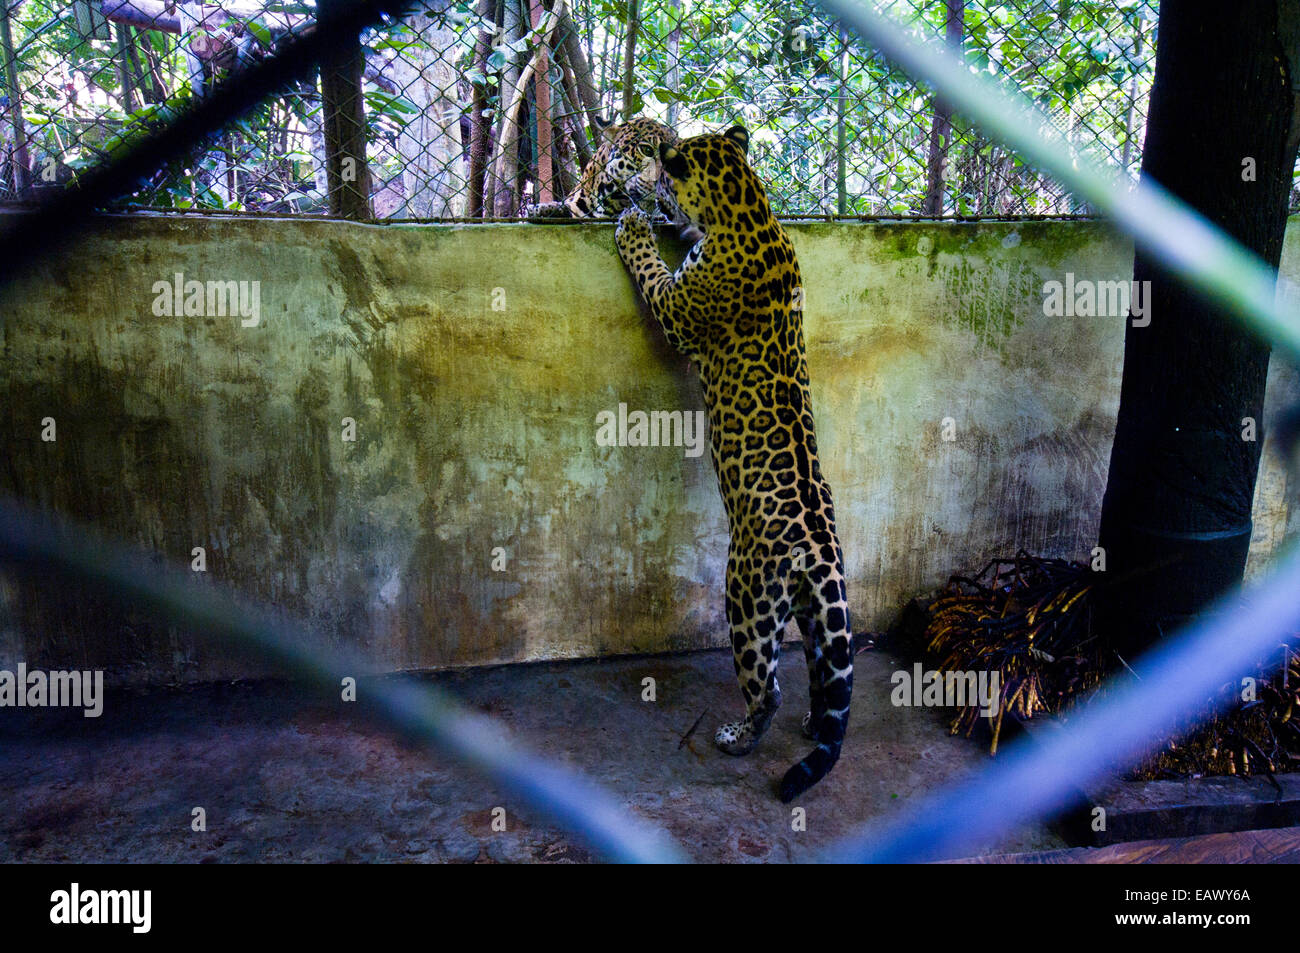 A confiscated Jaguar meets another for the first time after living in an urban environment. Stock Photo